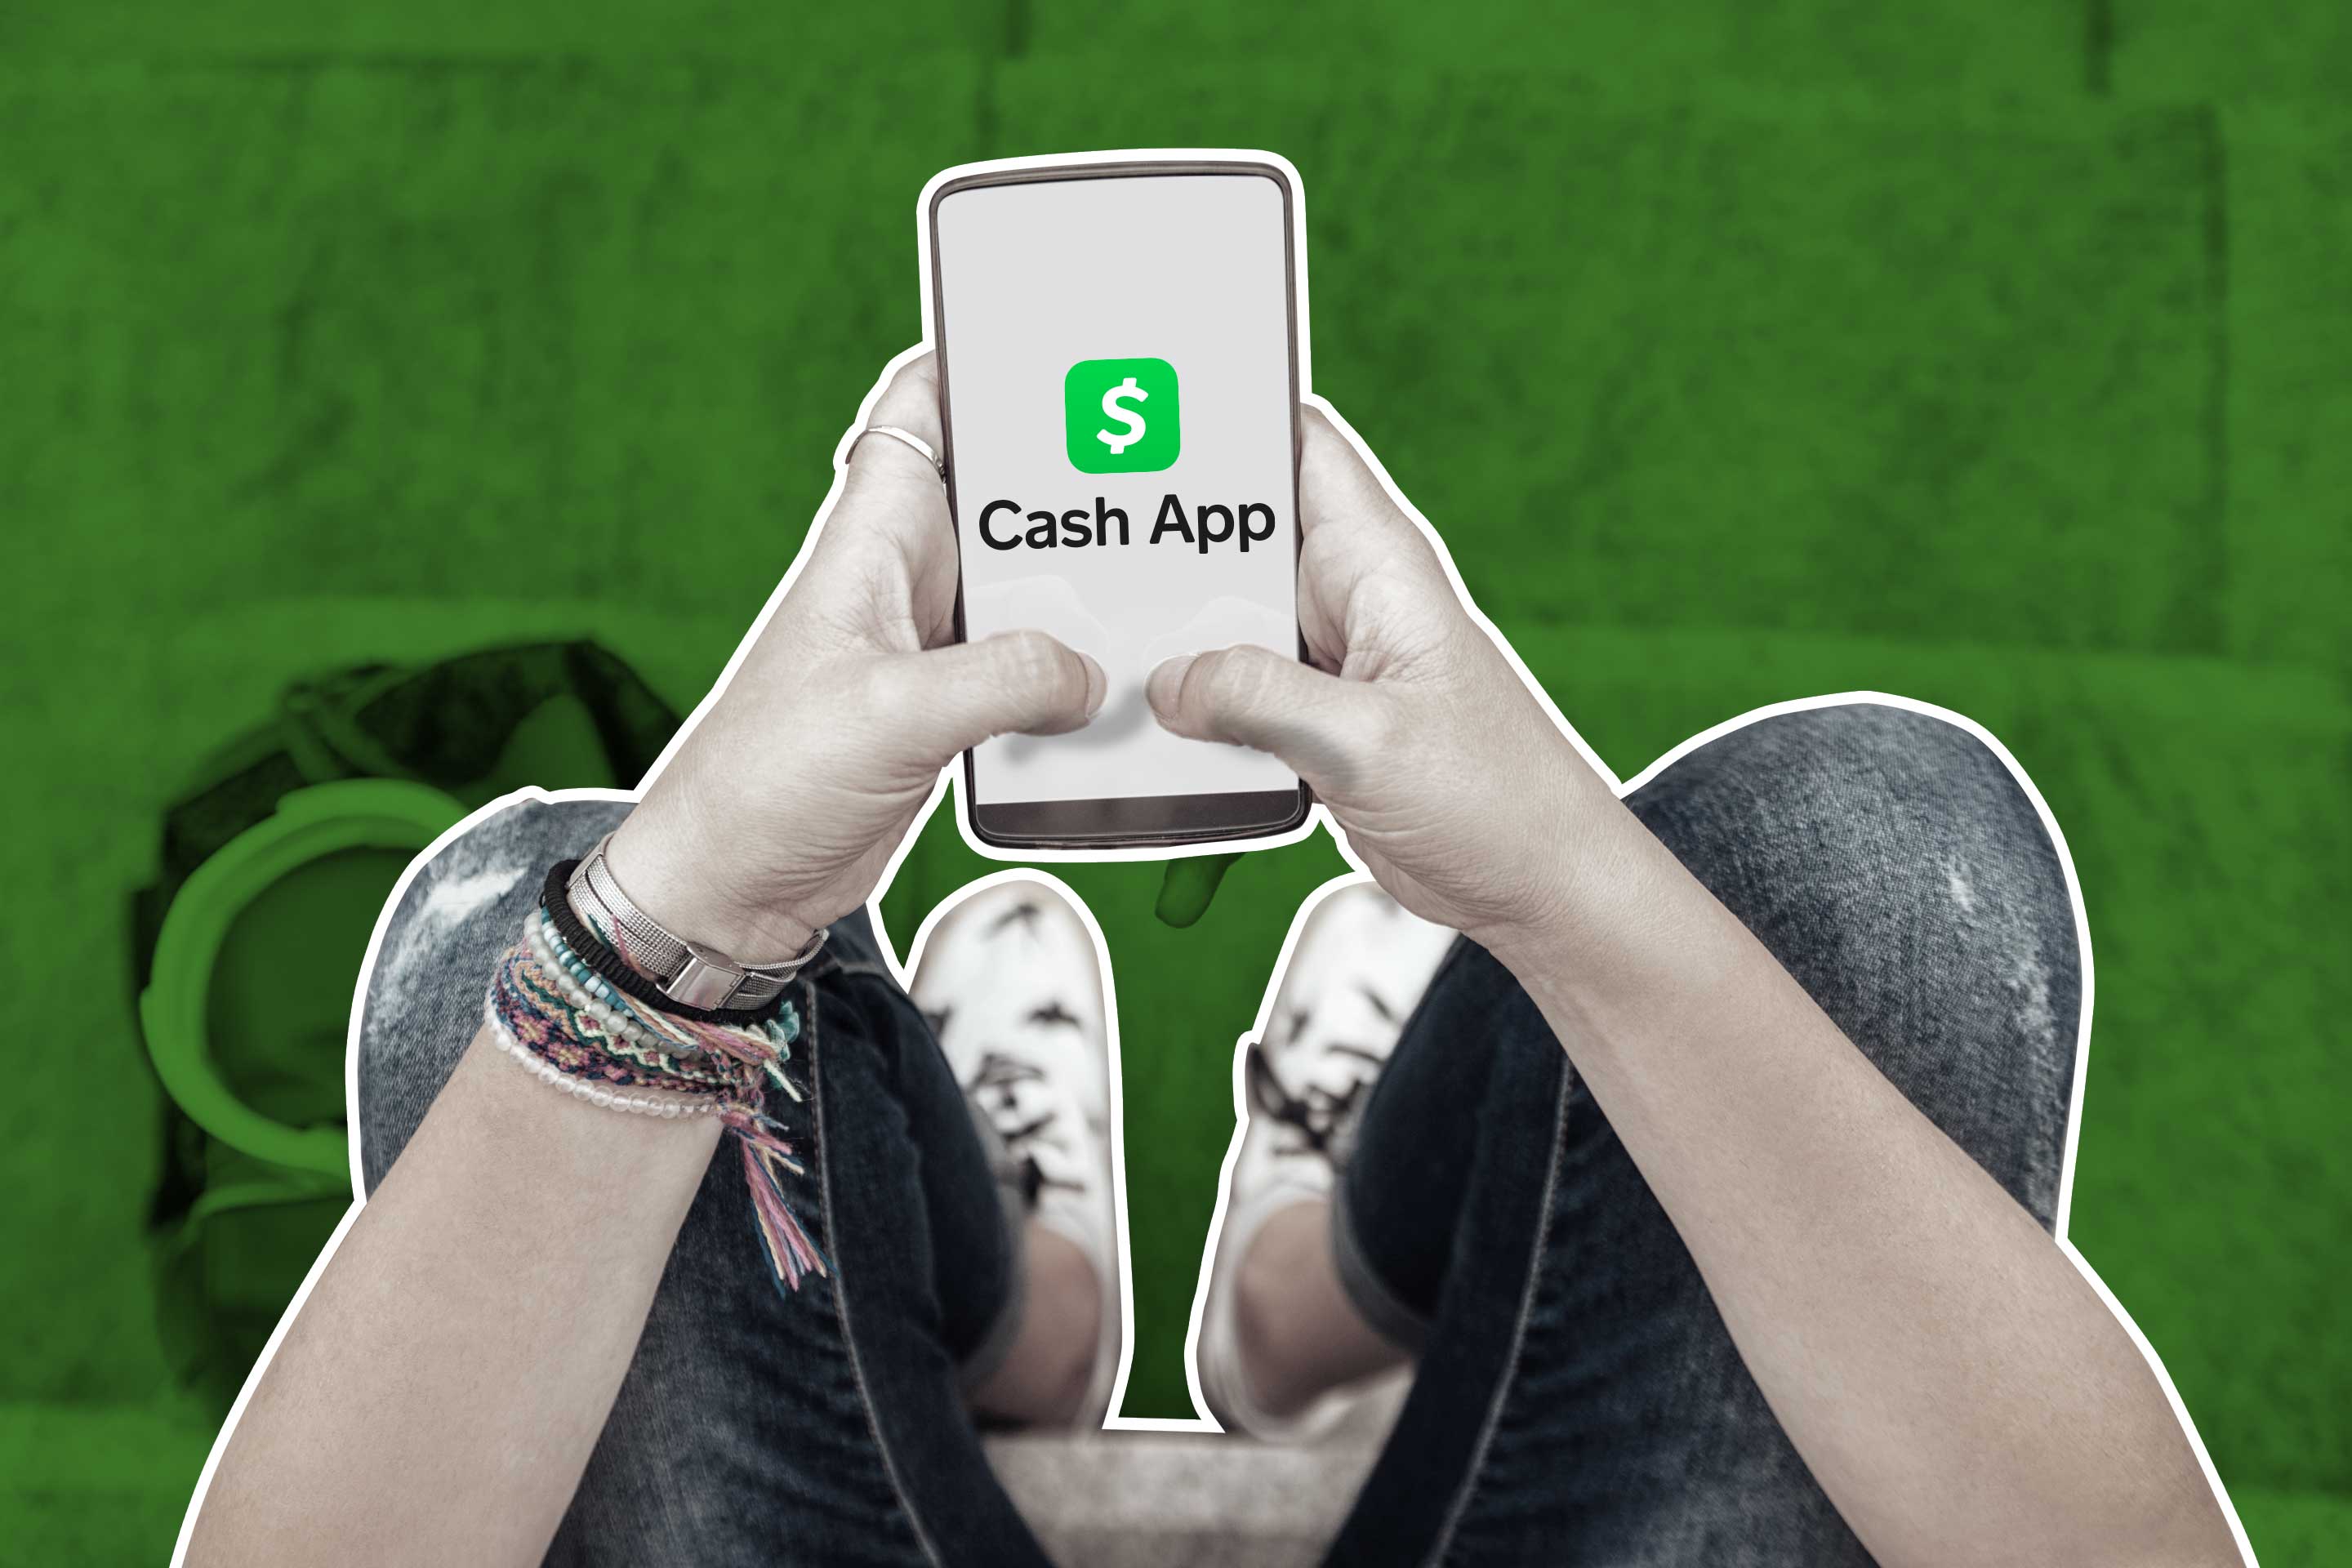 How Can I Use Cash App Without a Debit Card? 